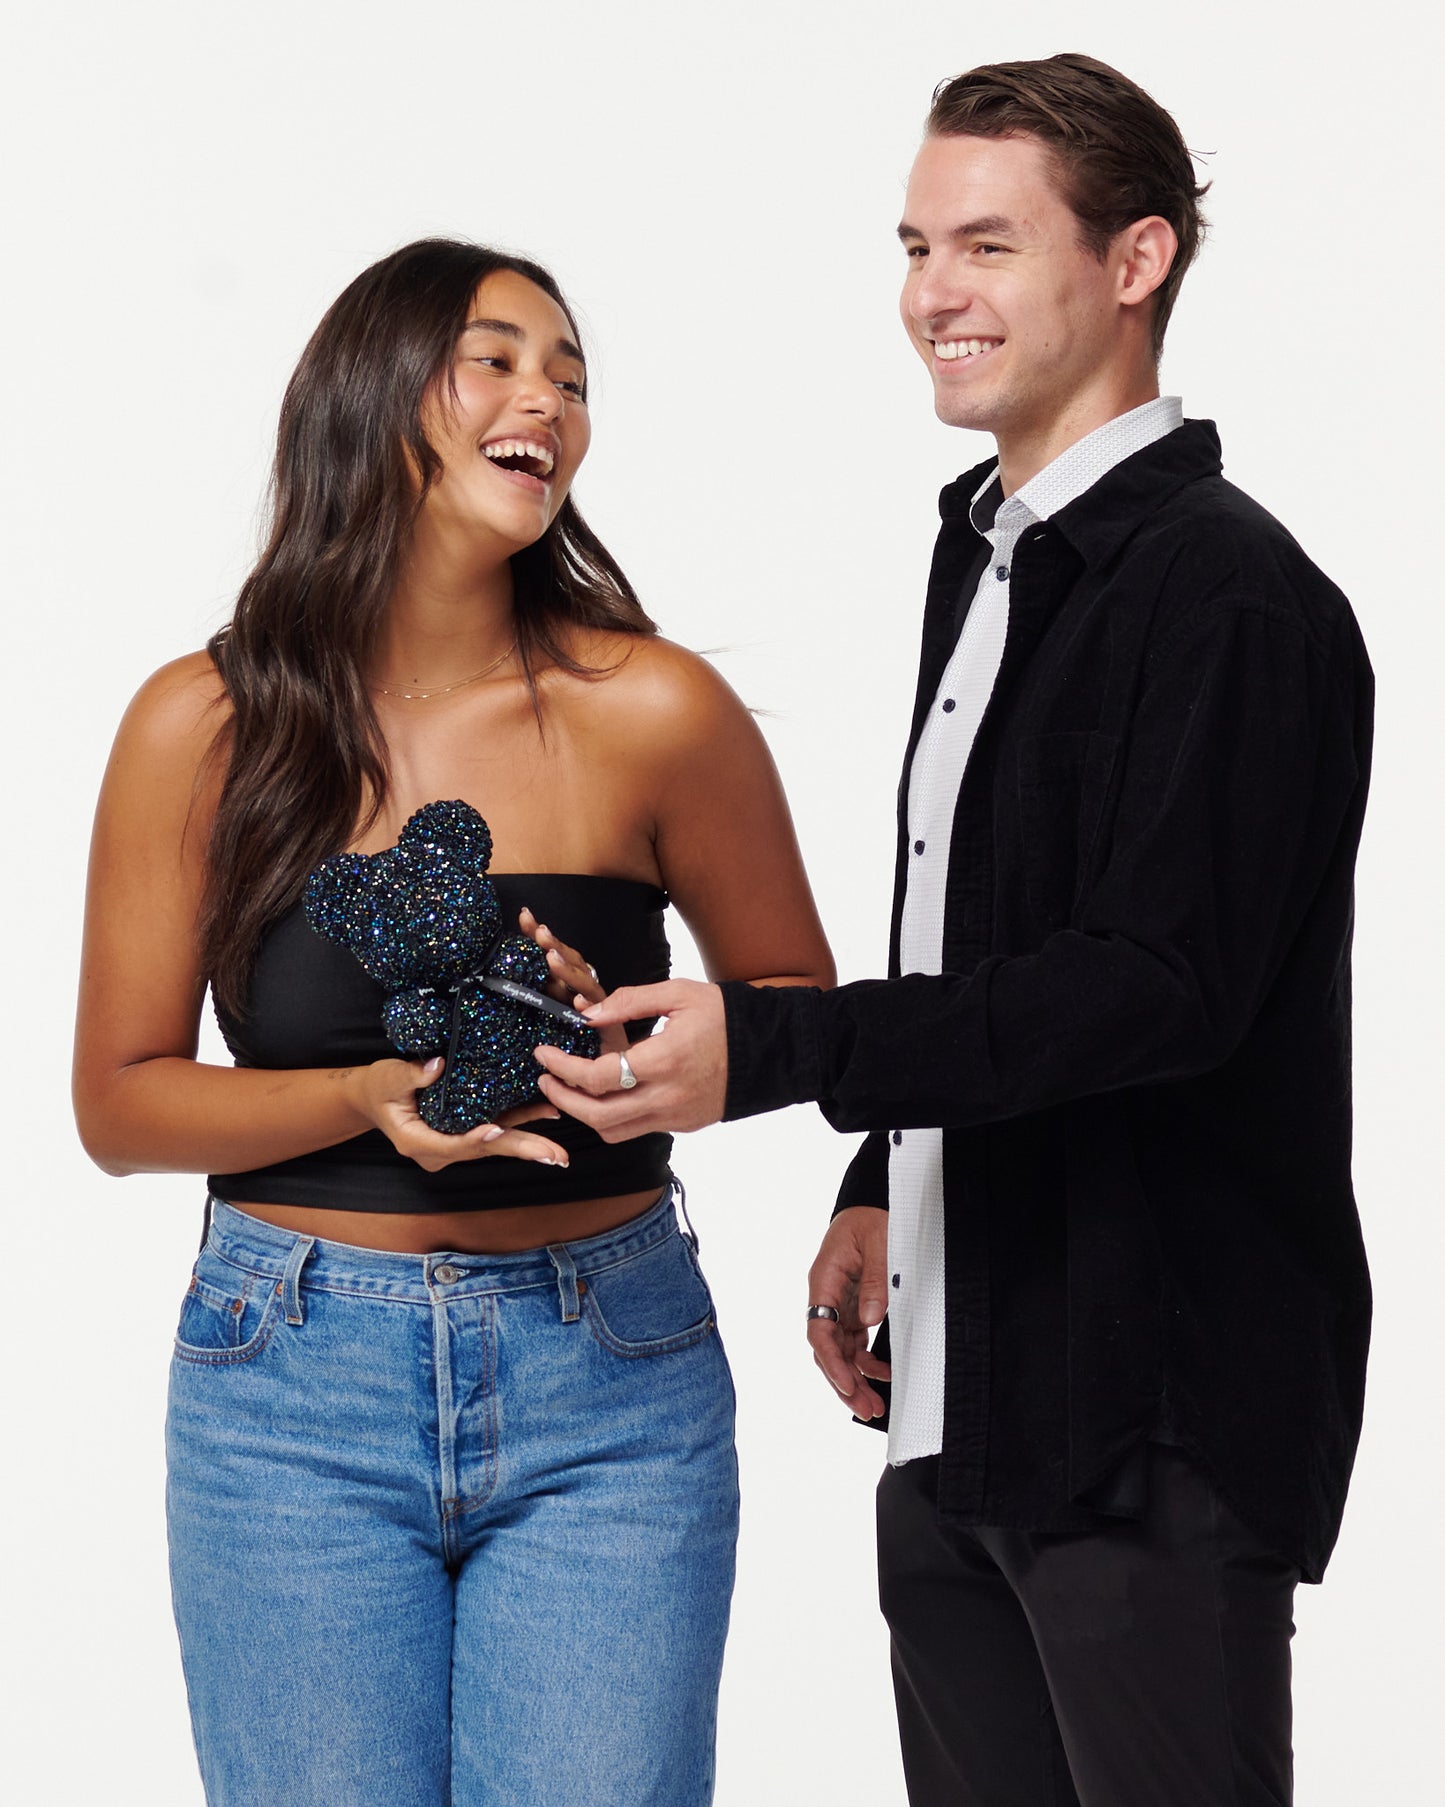 A woman in a black strapless top and jeans holds a glittery black flower bear, while a man in a black jacket over a white shirt smiles at her, touching the bear's paw. They both appear cheerful and are posing for the camera.